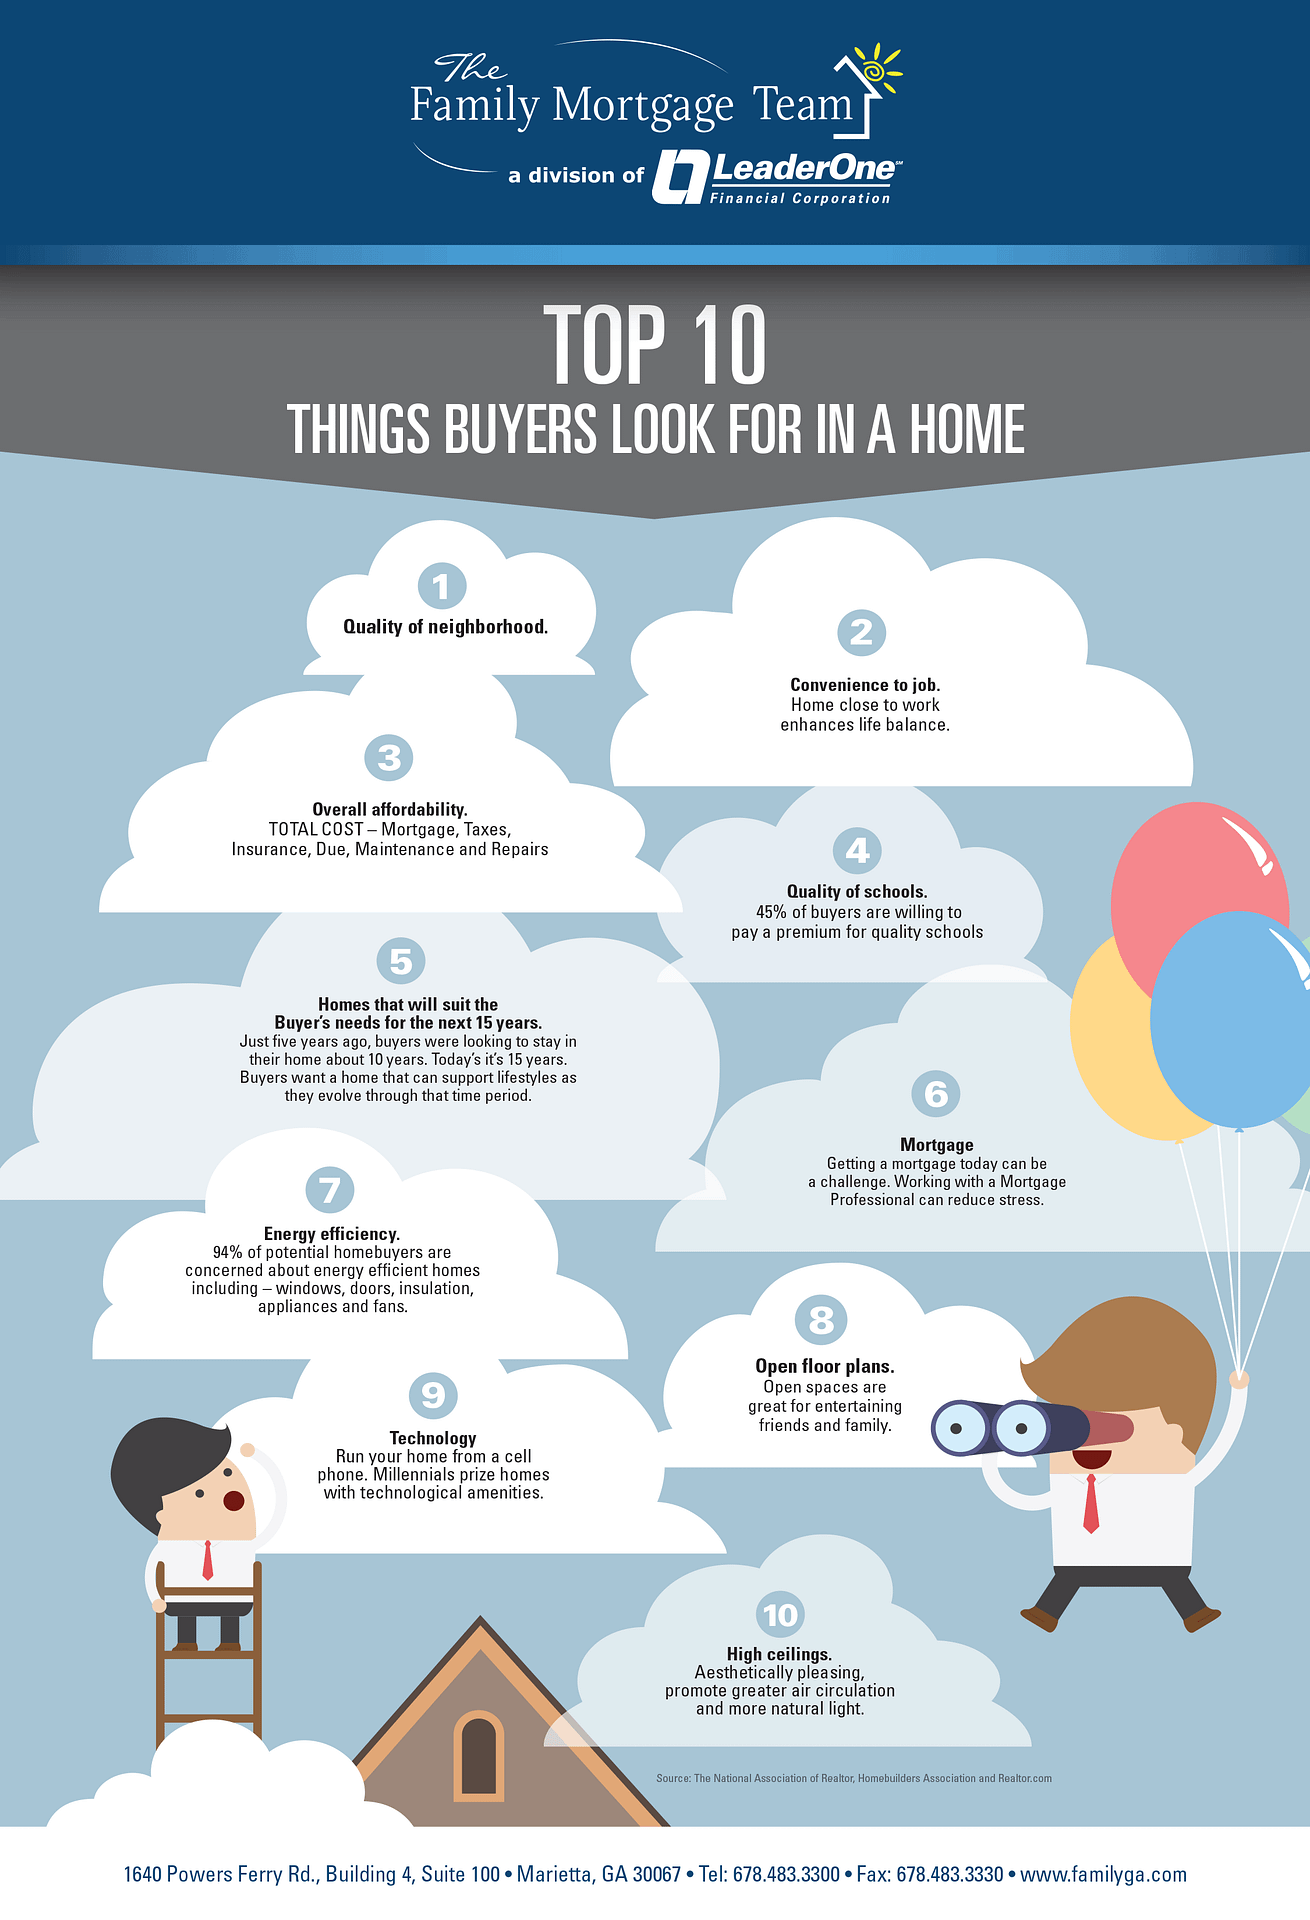 Top 10 Things Home Buyers Look For